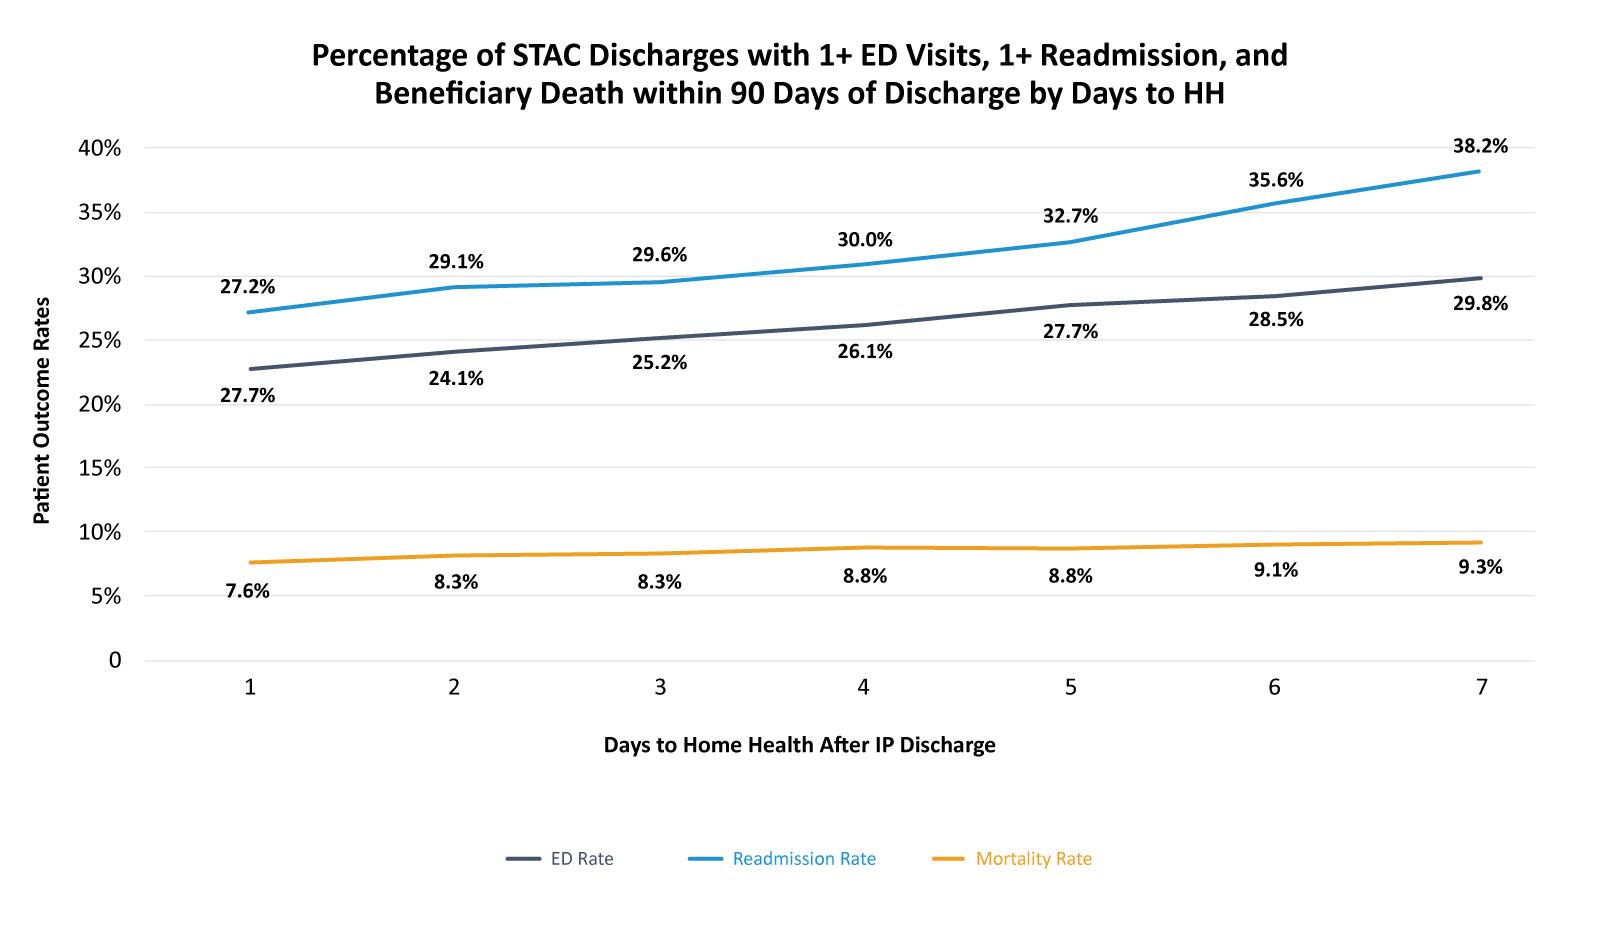 Percentage of STAC Discharges with 1+ ED Visits, 1+ Readmission, andBeneficiary Death within 90 Days of Discharge by Days to HH